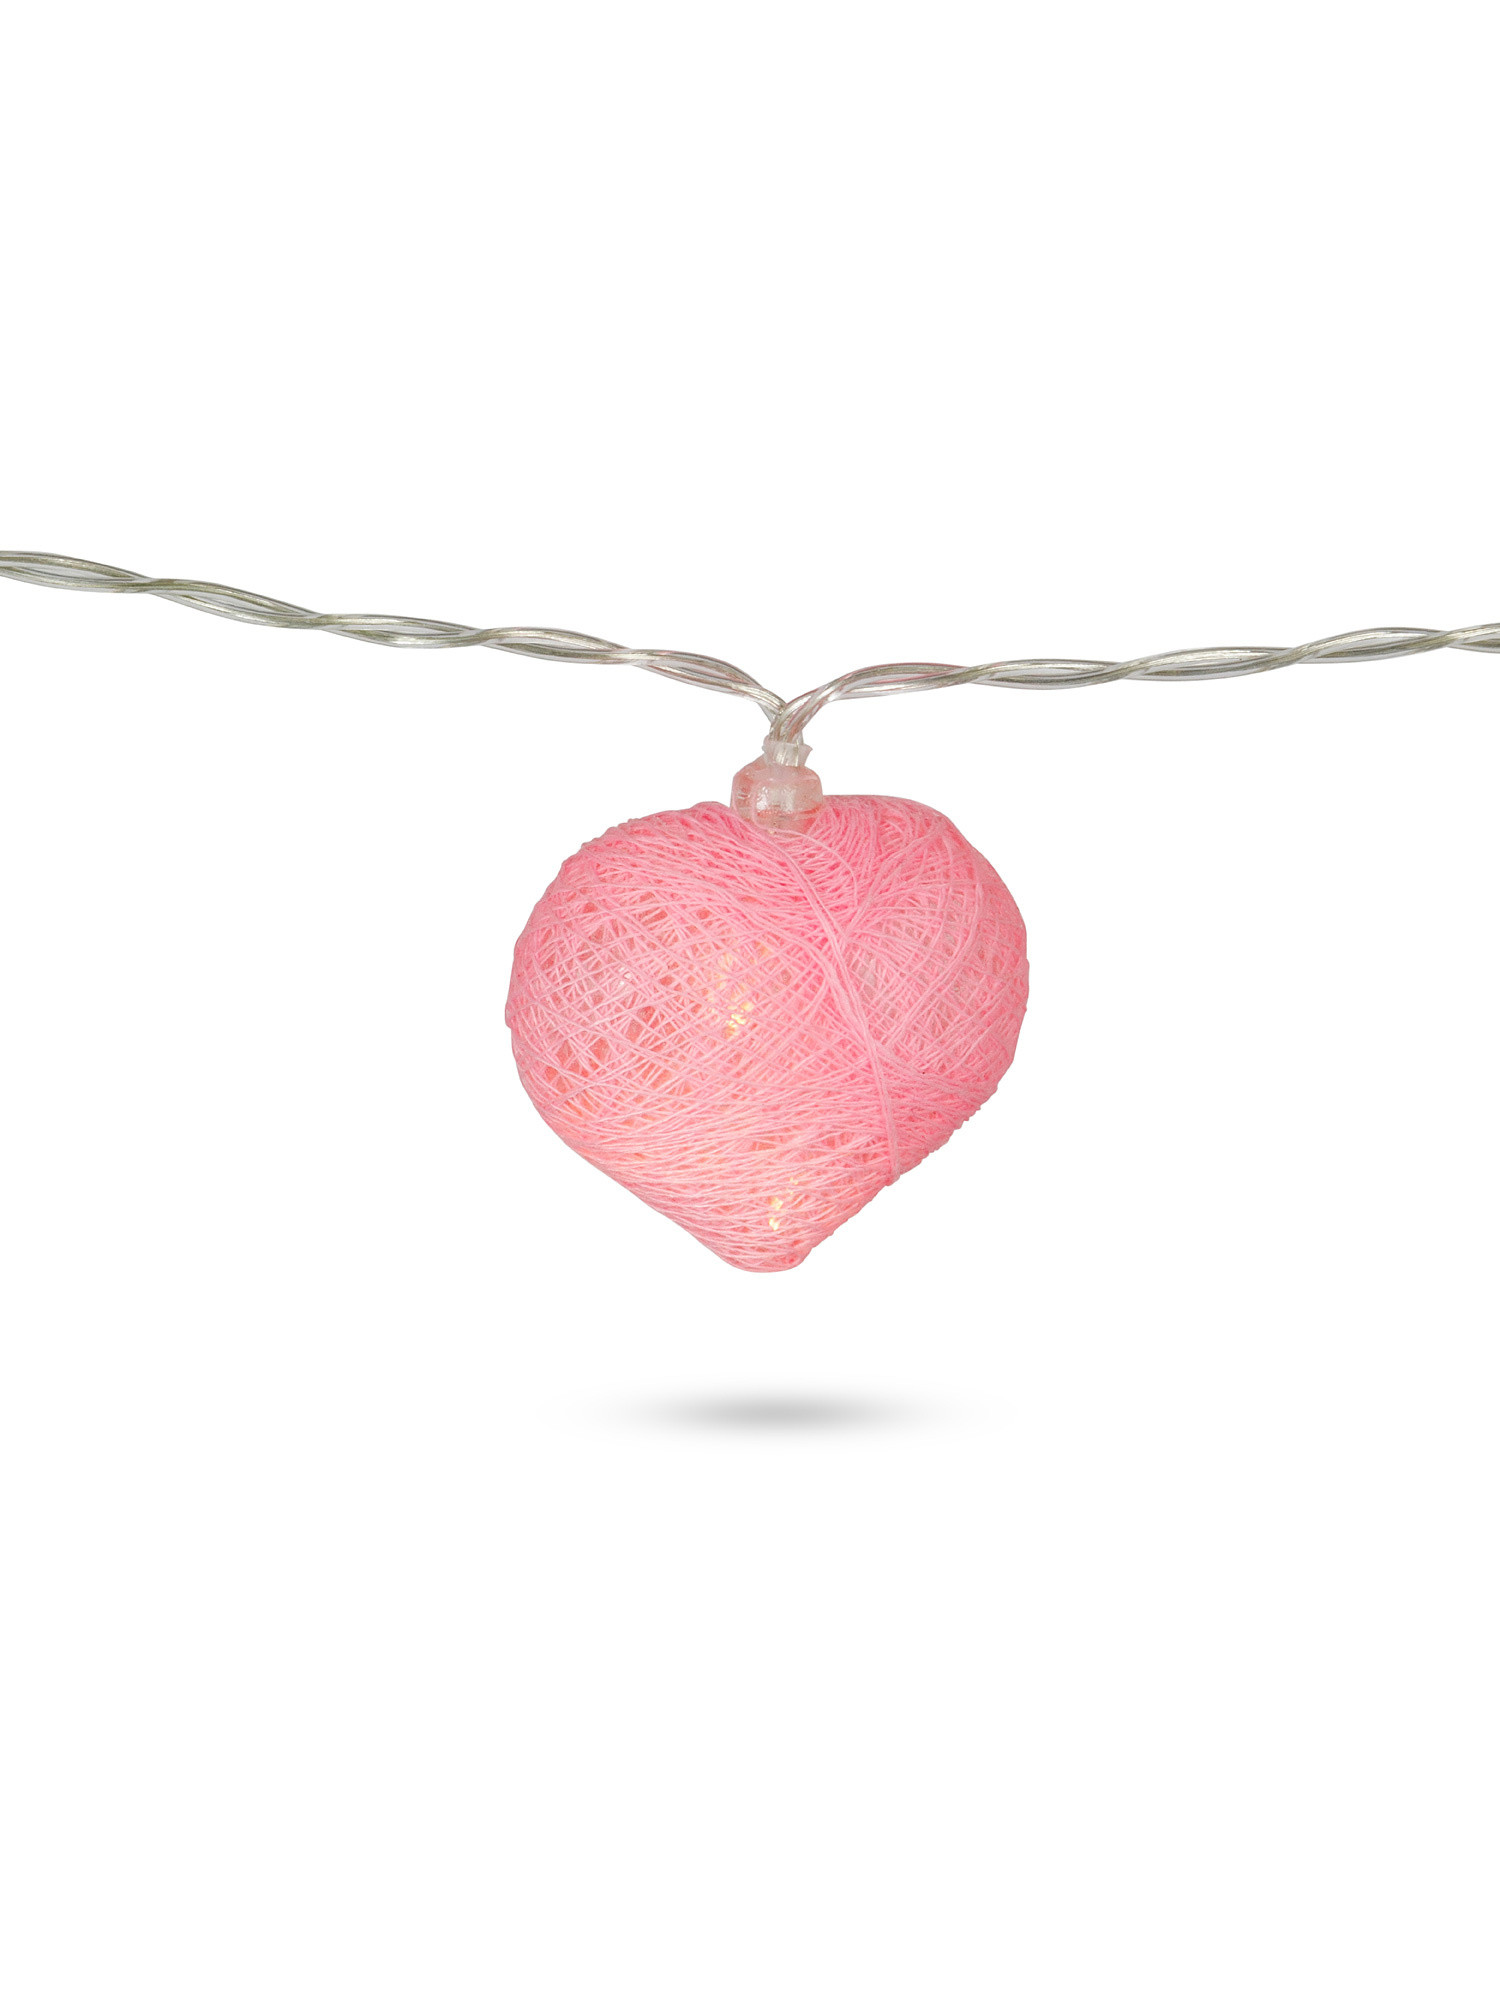 10 LED hearts chain, Pink, large image number 0